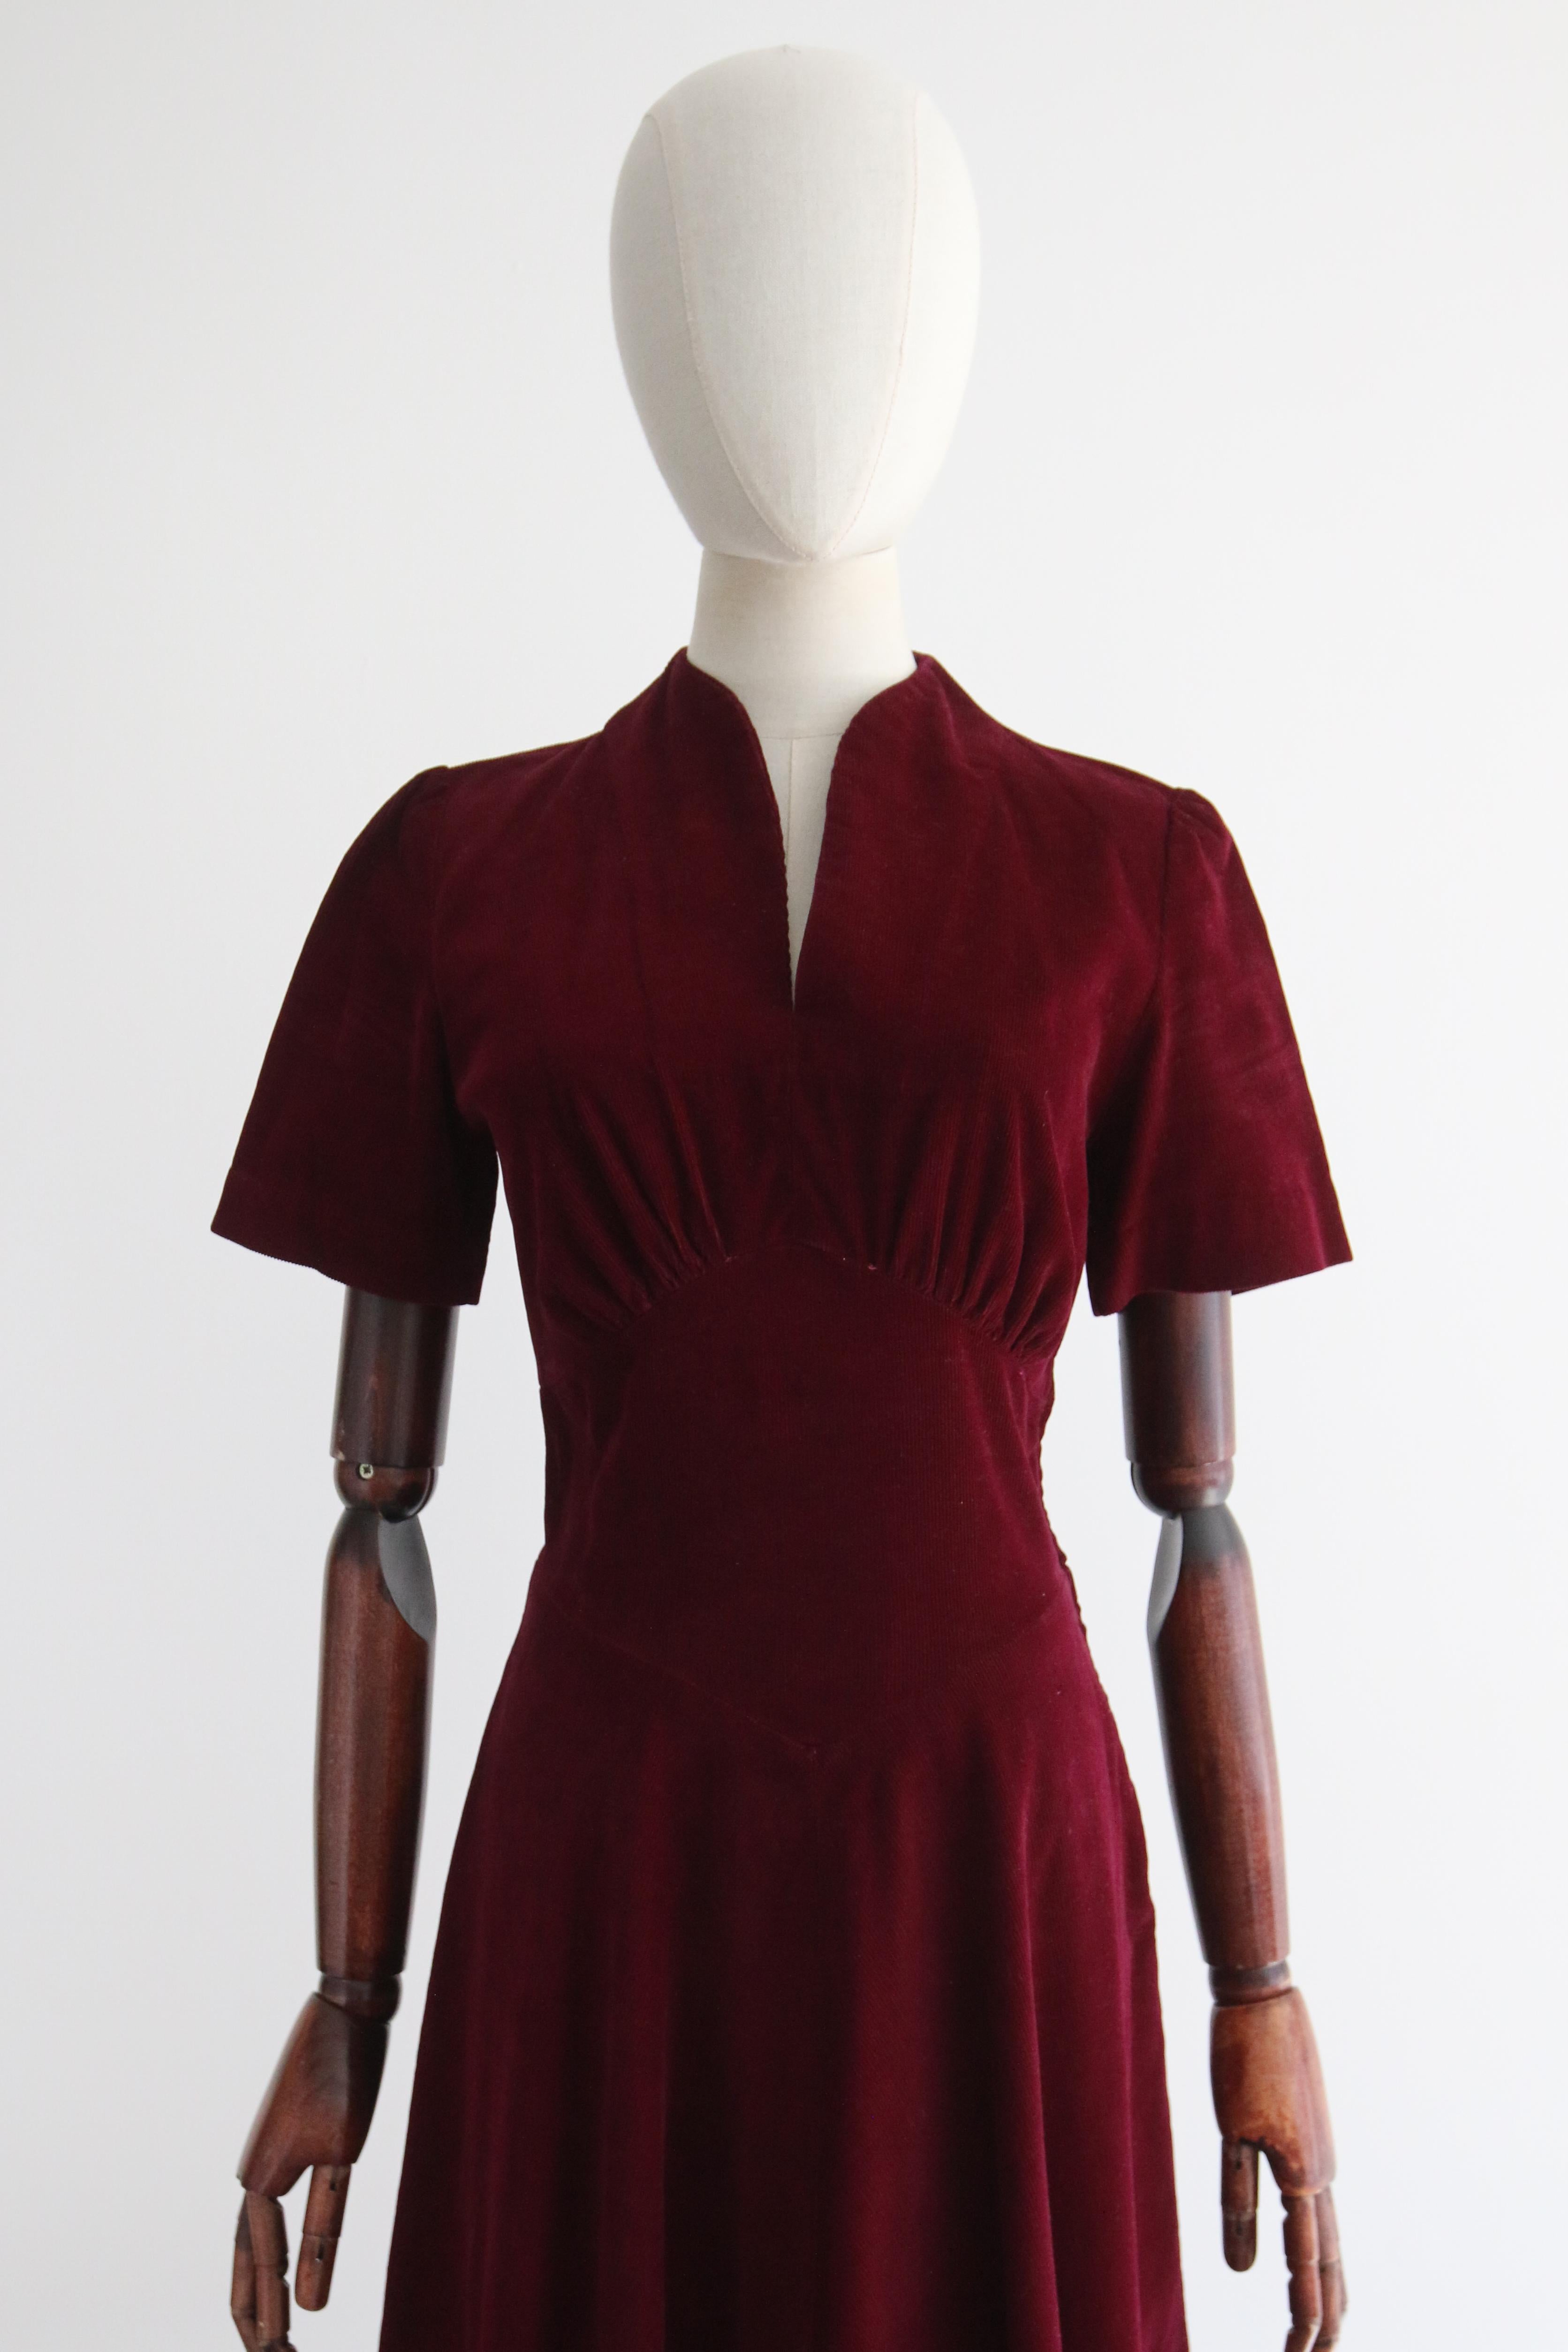 This wonderful 1940's dress rendered in a deep shade of Bordeaux corduroy, is just the piece to welcome to your seasonal wardrobe. 

The slim V shaped neckline is framed by a simple shoulder line. The short length sleeves boast slim gathered pleats